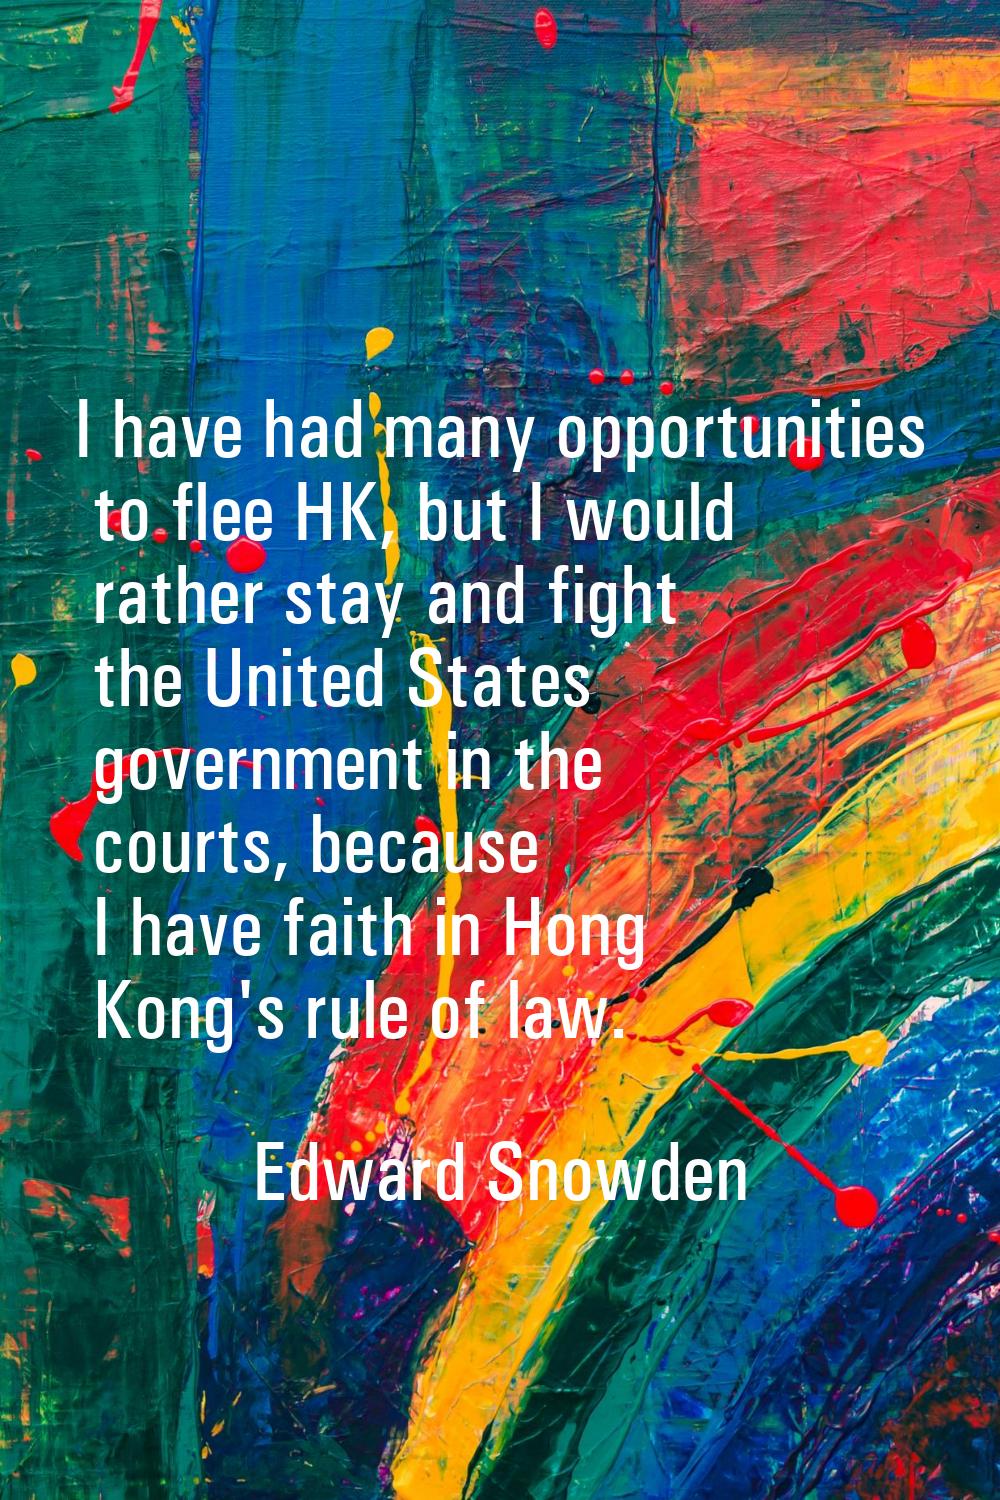 I have had many opportunities to flee HK, but I would rather stay and fight the United States gover